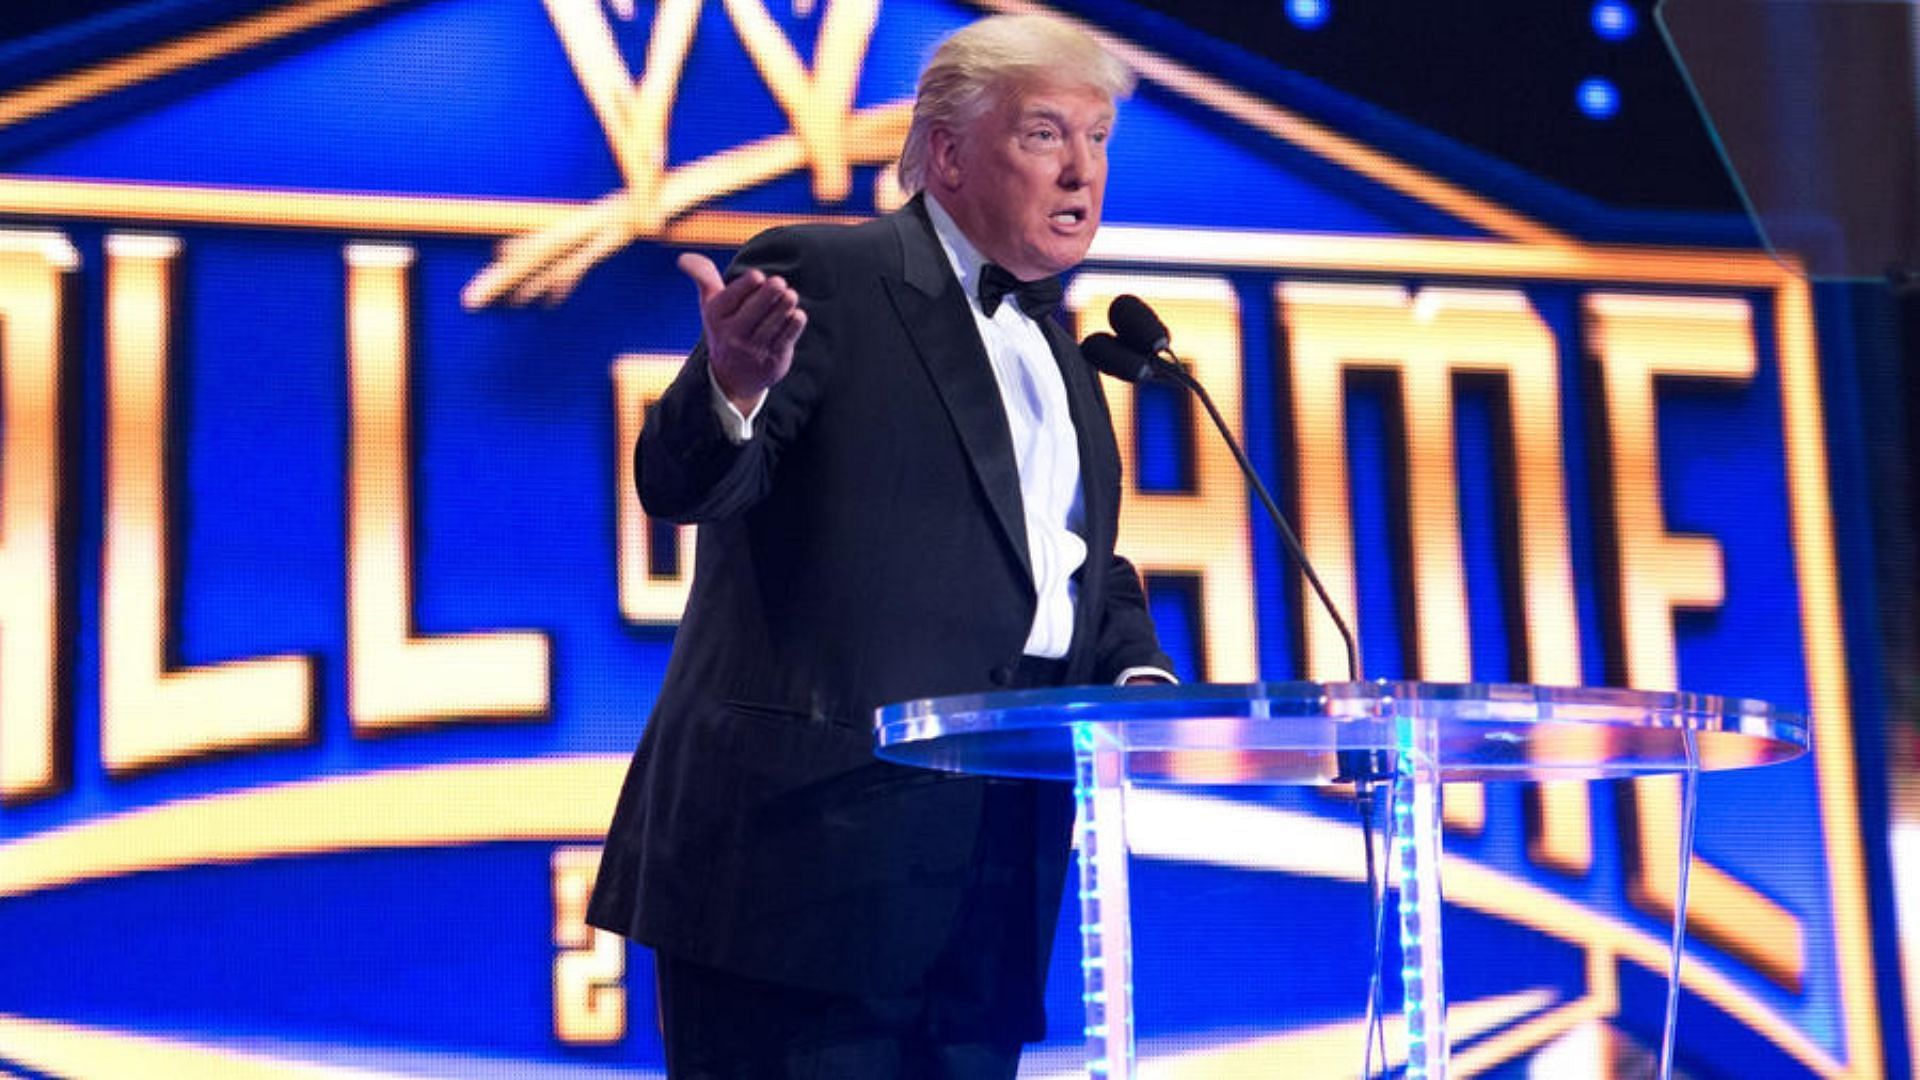 2013 WWE Hall of Fame inductee Donald Trump